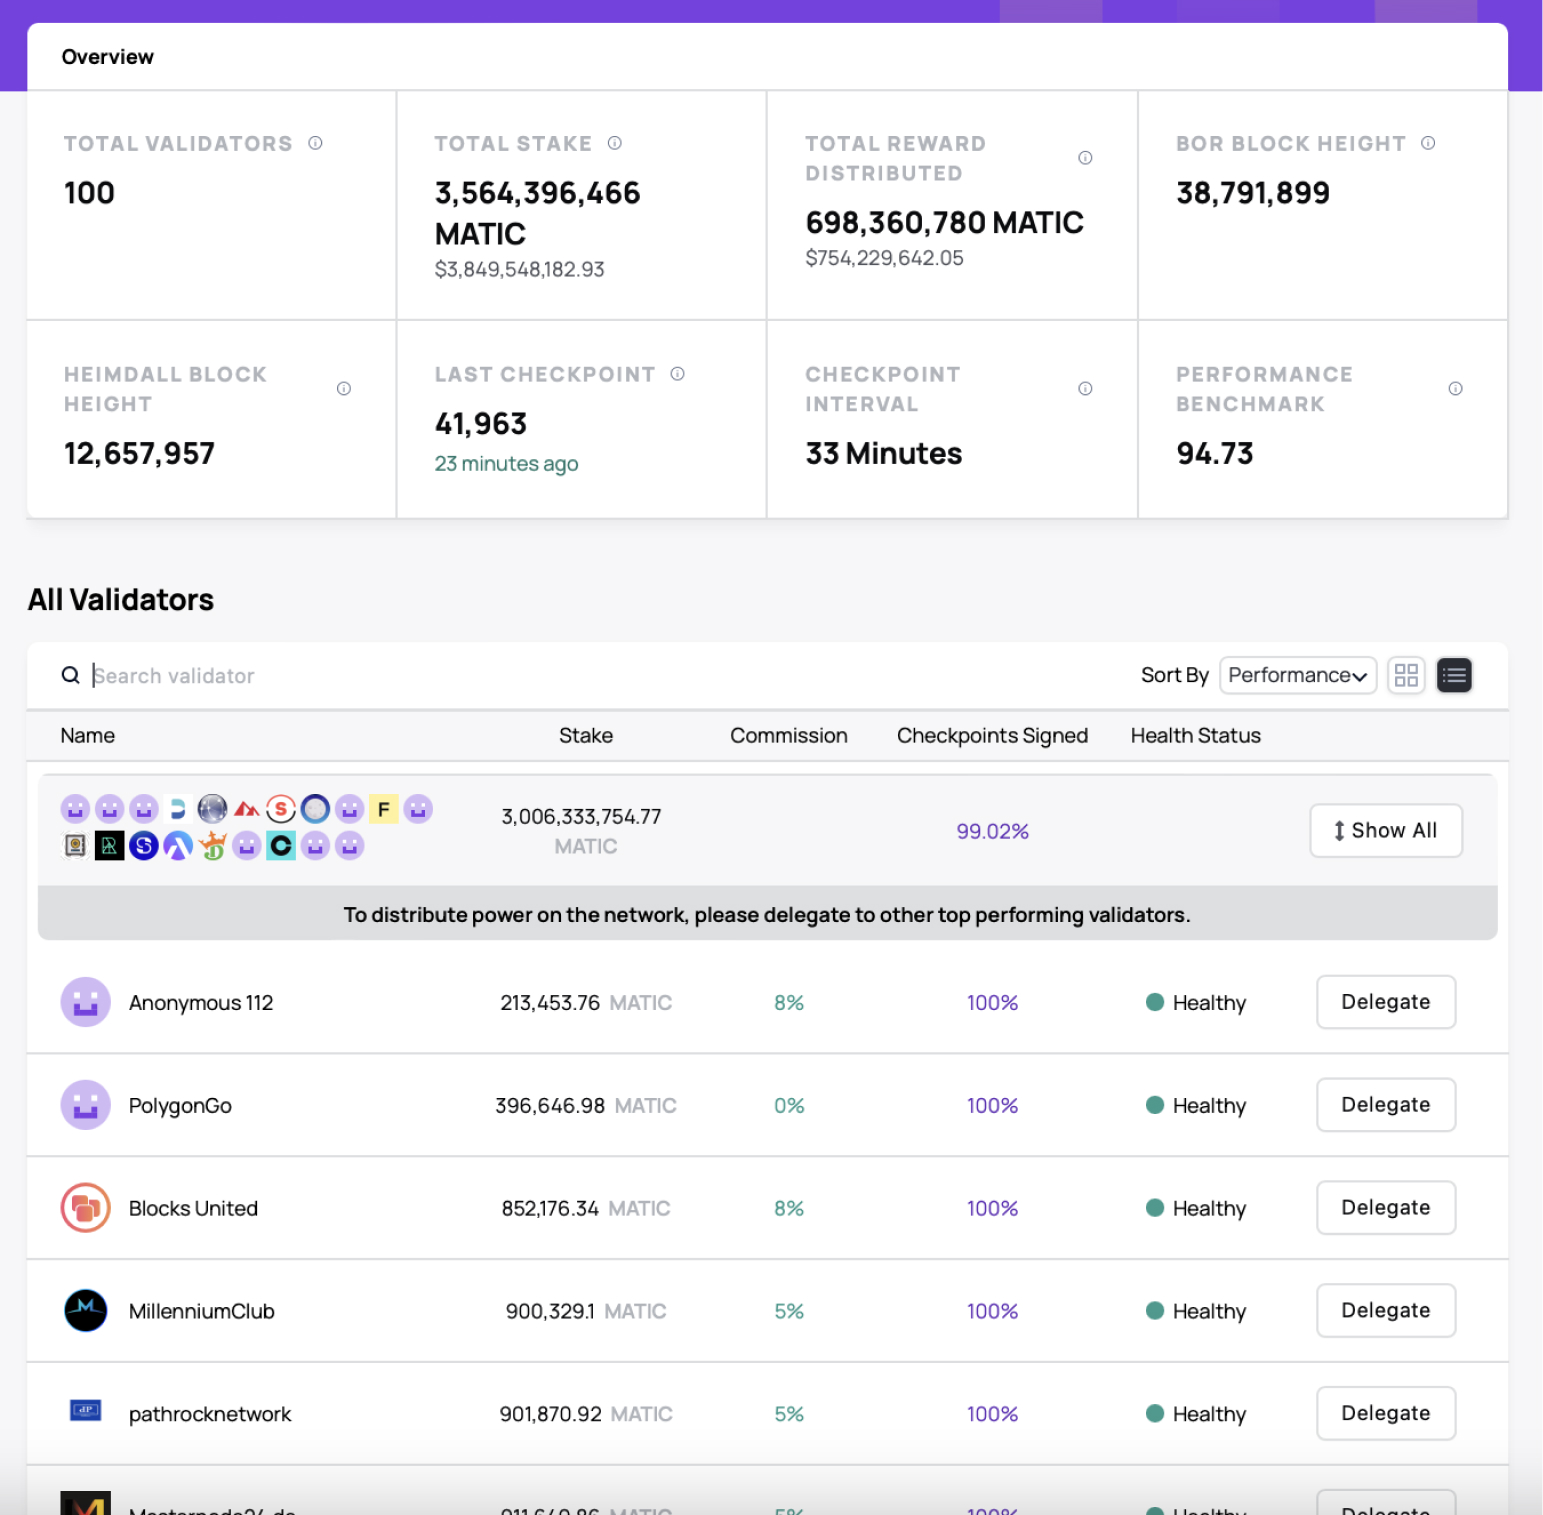 10 - Polygon Staking Dashboard - Overview